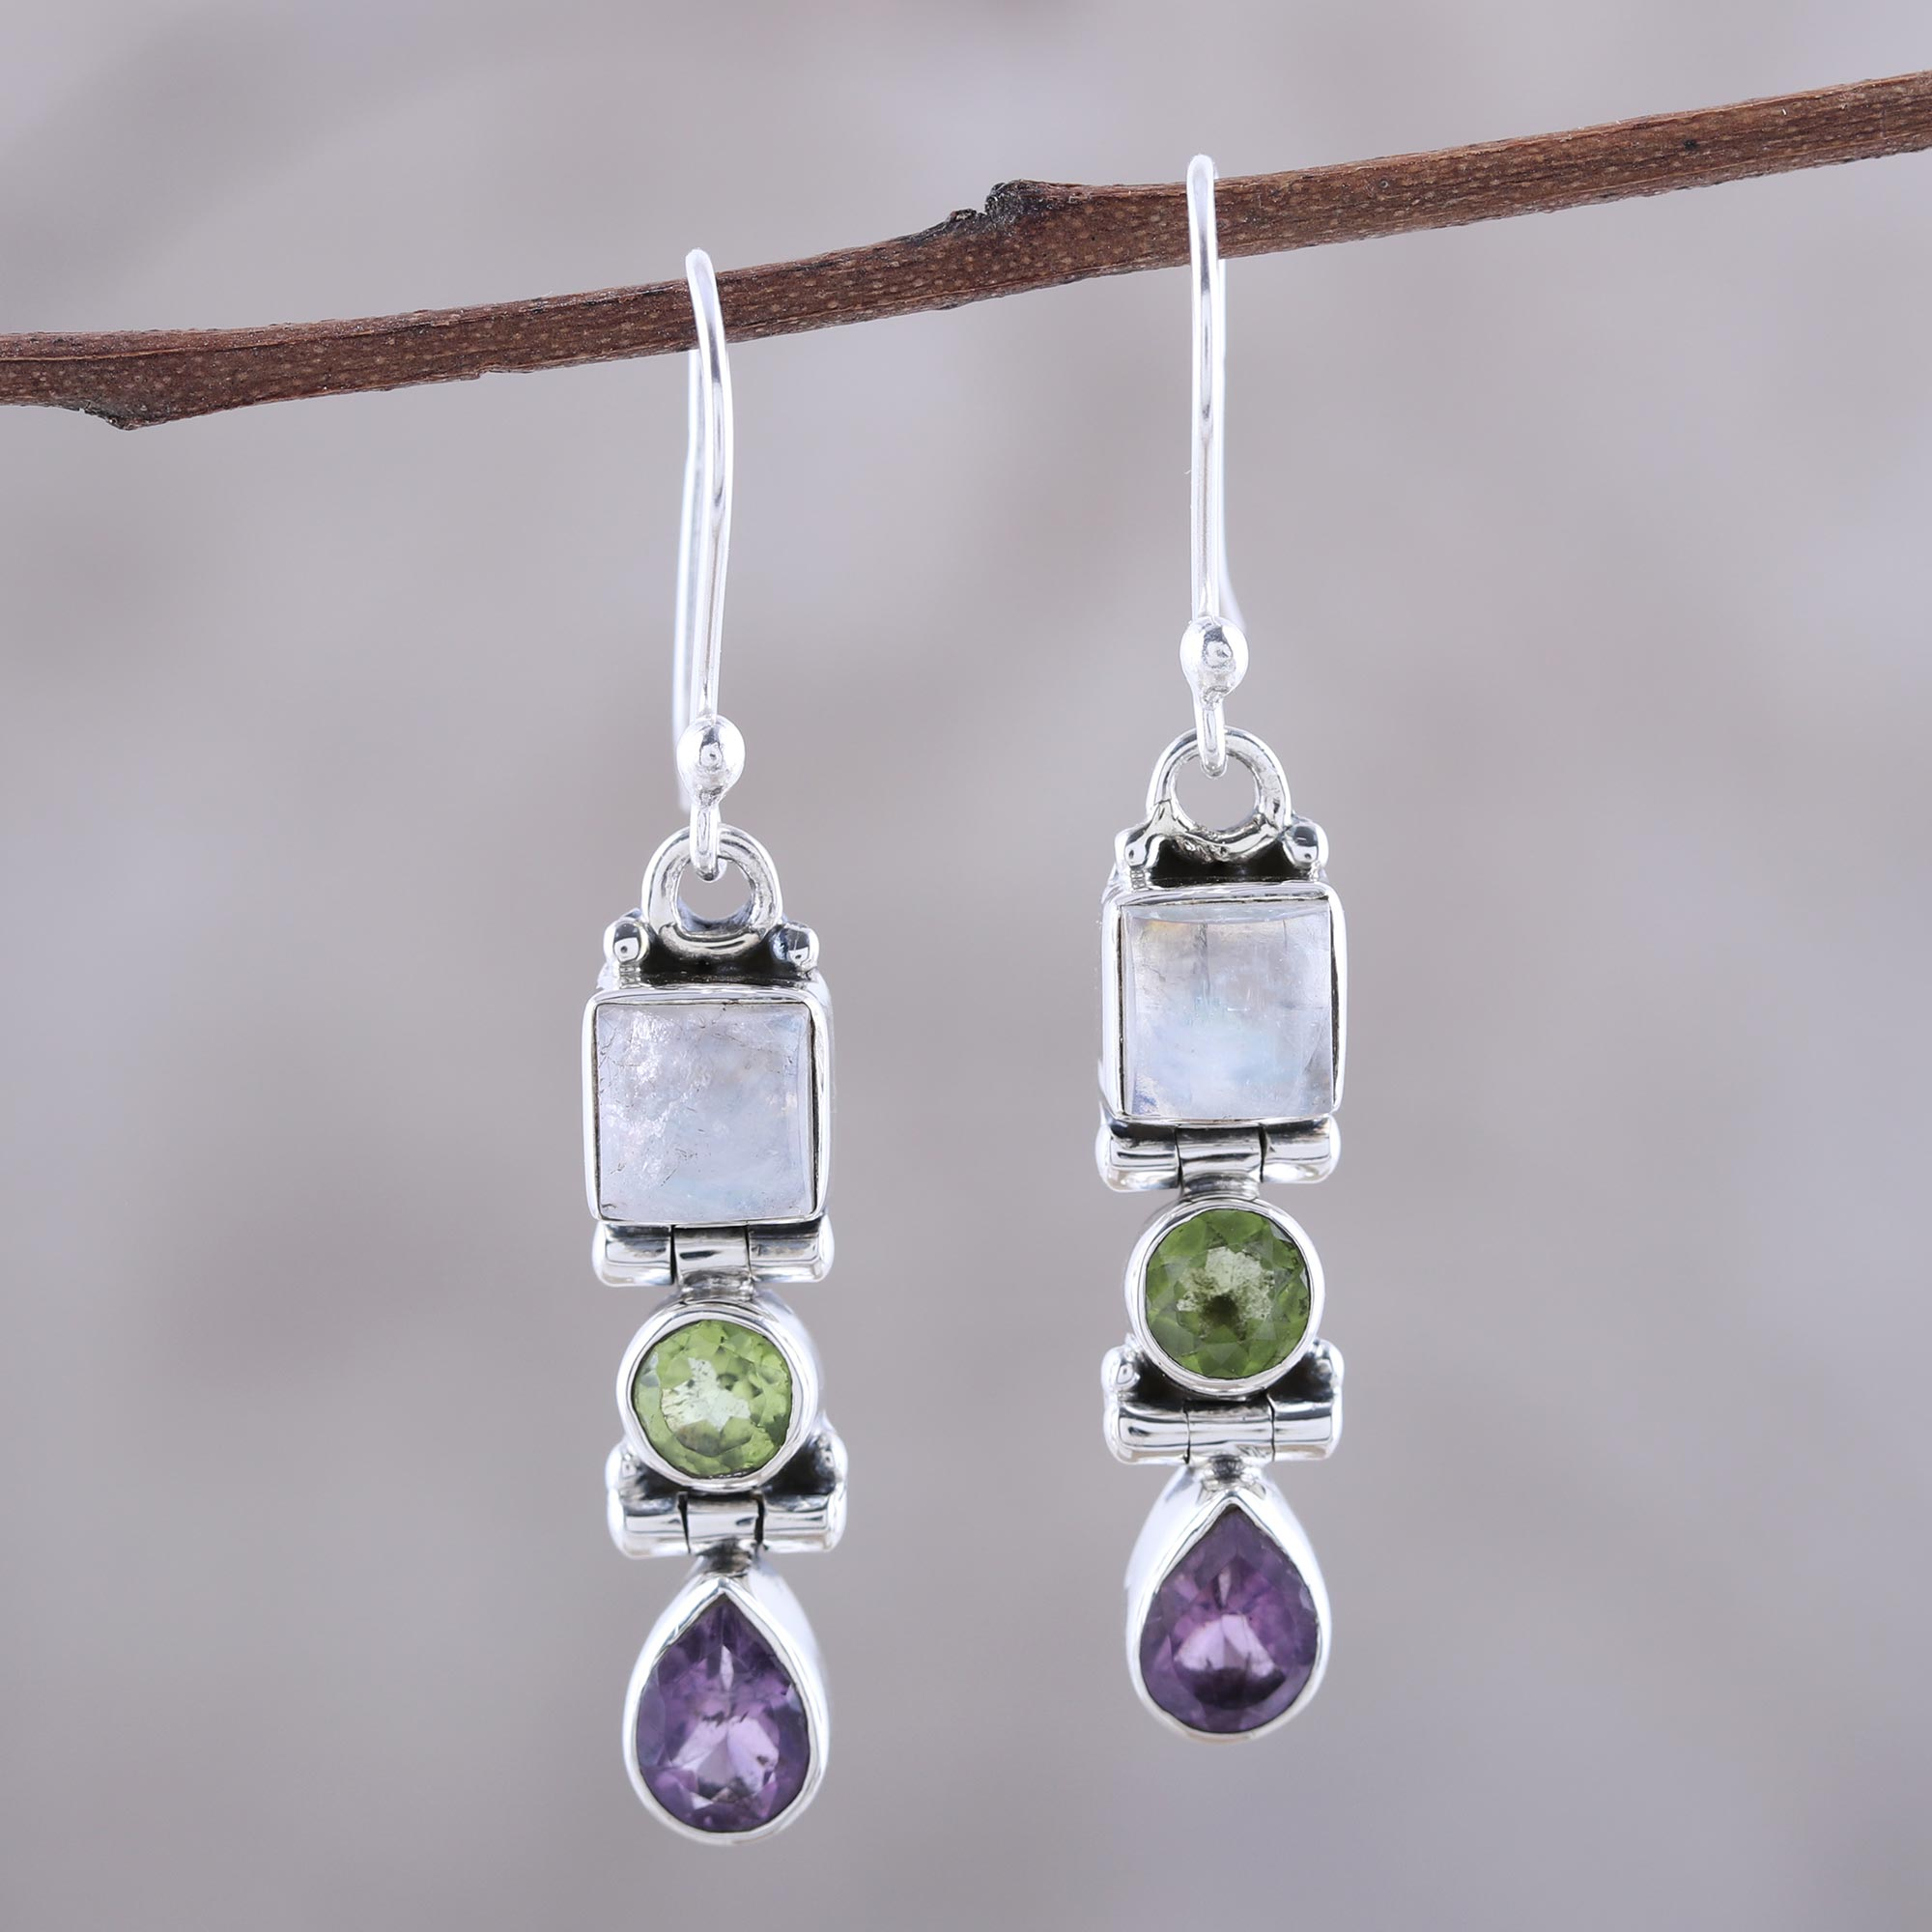 Multi-Gemstone and Sterling Silver Dangle Earrings, 'Graceful Trio in White'